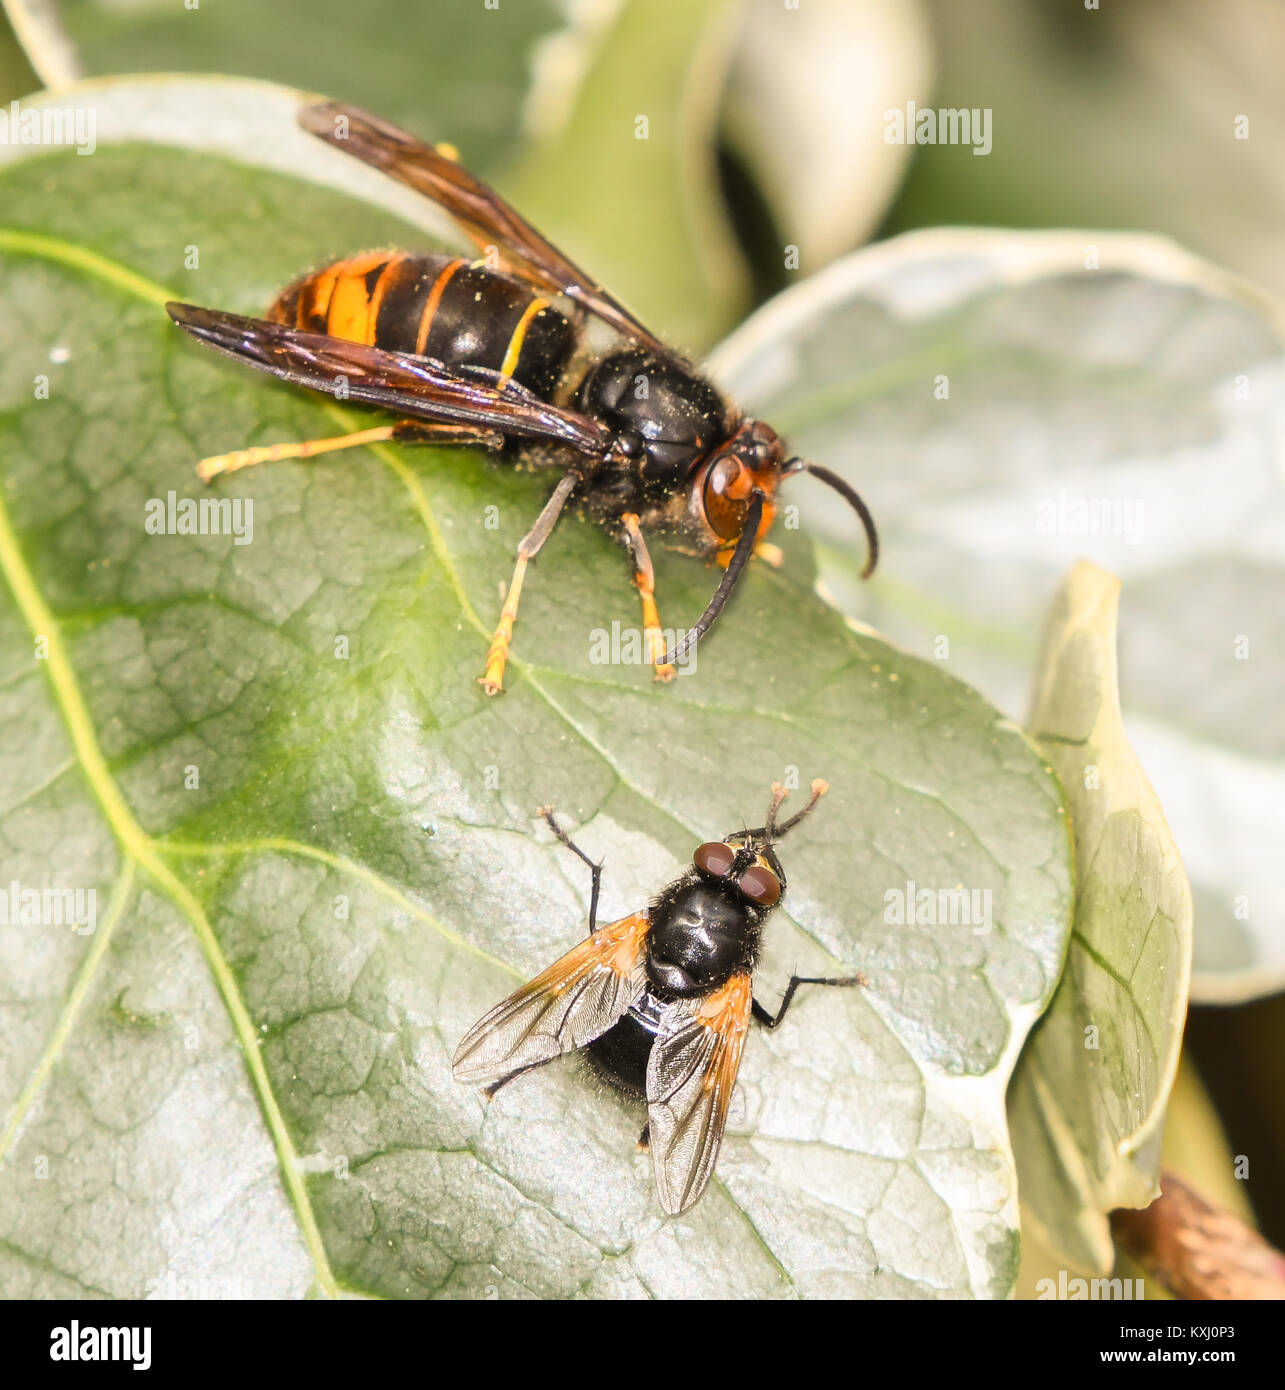 Asian wasp next to fly perched on an ivy leaf Stock Photo